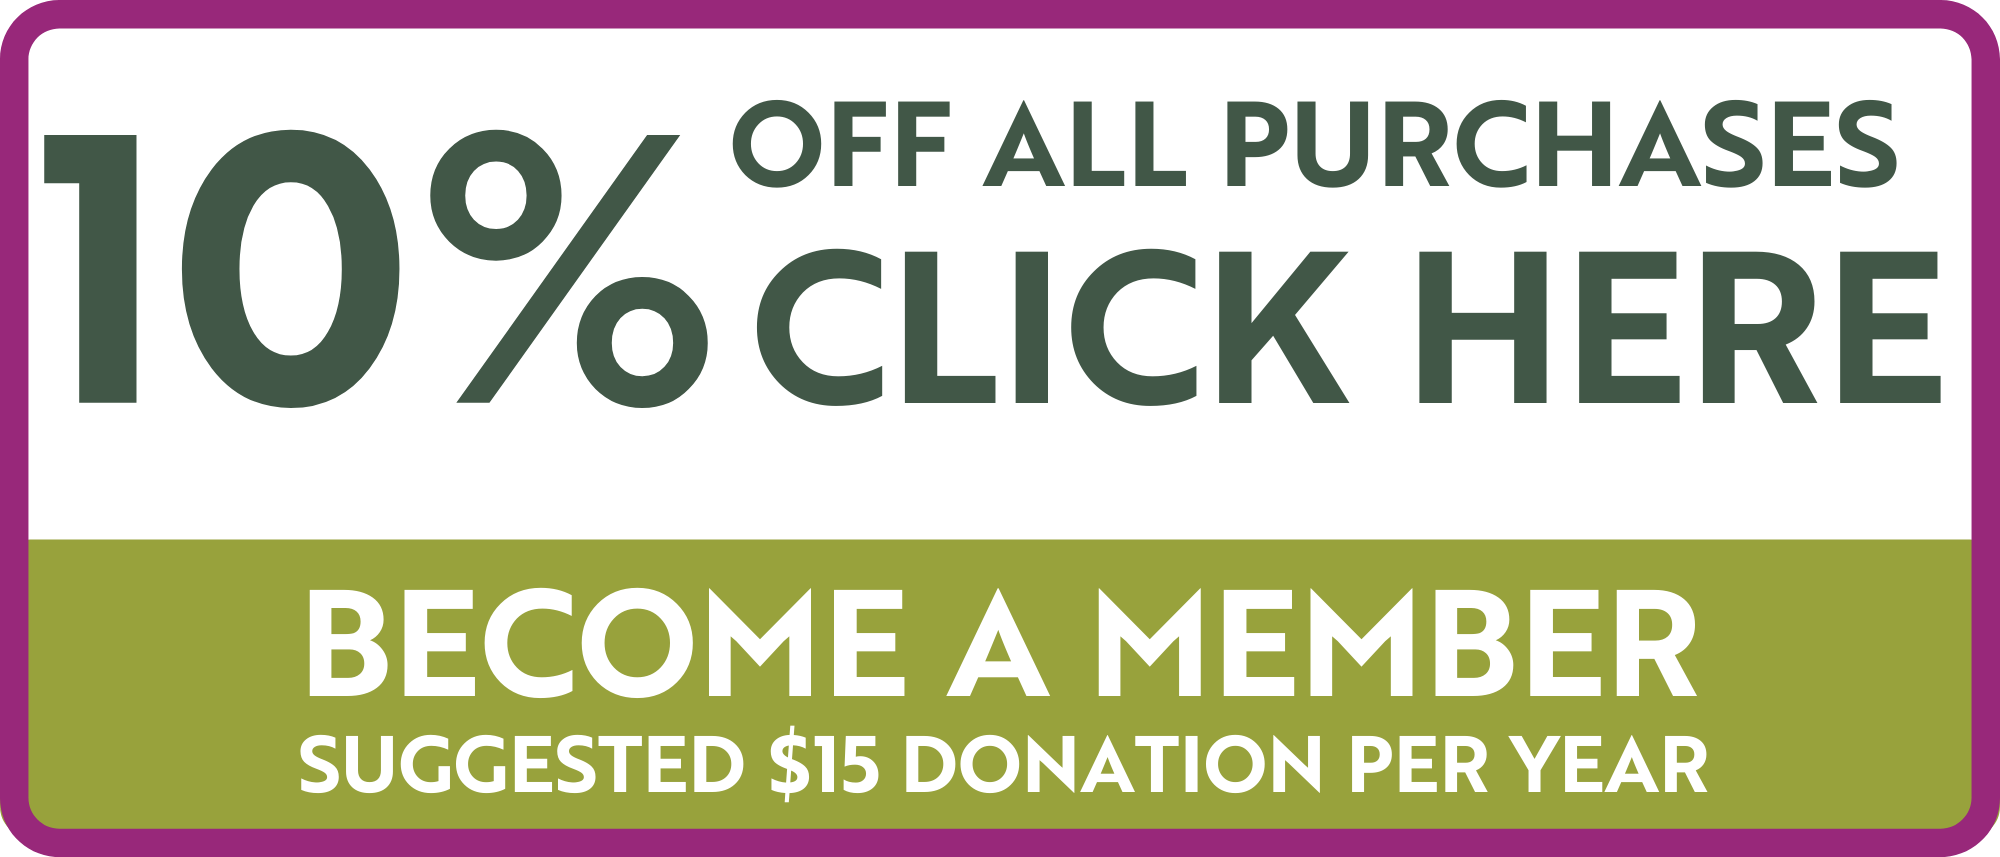 Become a Member button that reads "10 percent off all purchases. Click here. Become a member. Suggest $15 donation per year."